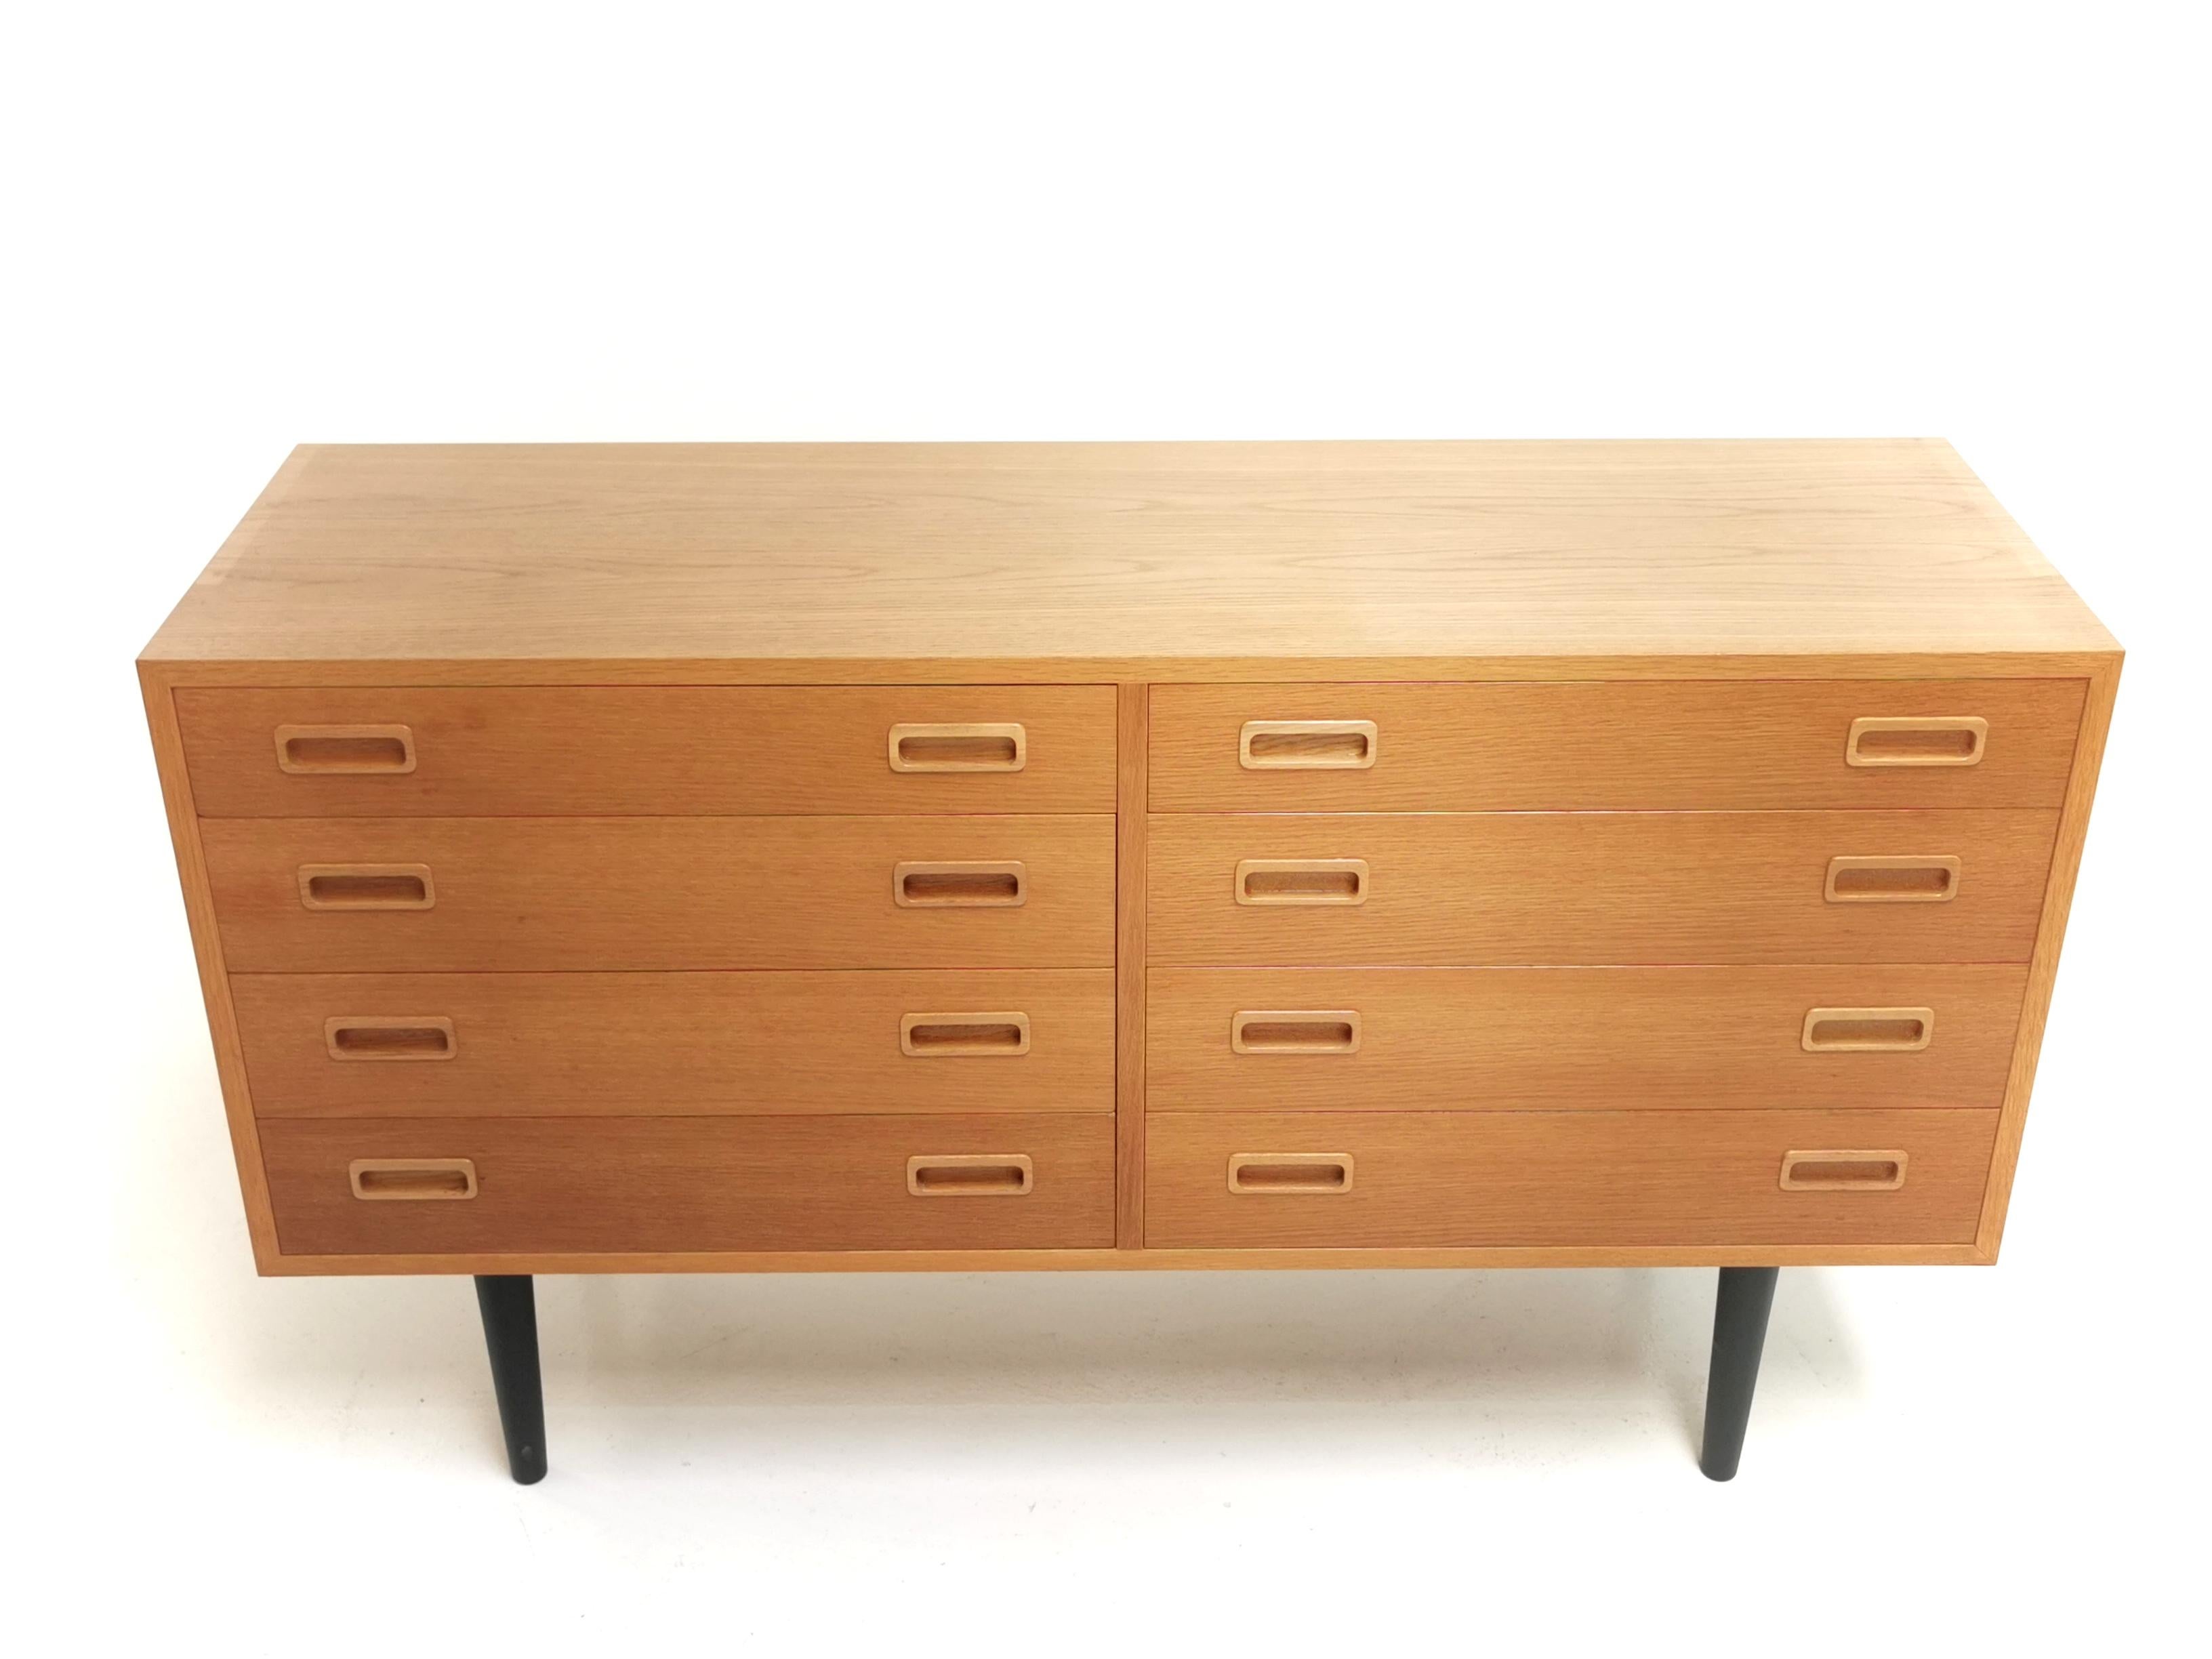 Danish chest of drawers

High-quality made chest of drawers by Carlo Jensen.

In oak, with dovetail joints.

Made in Denmark, by the Hundevad company, circa 1970s.

We have raised the unit on solid timber Ebonized legs.

Dimensions